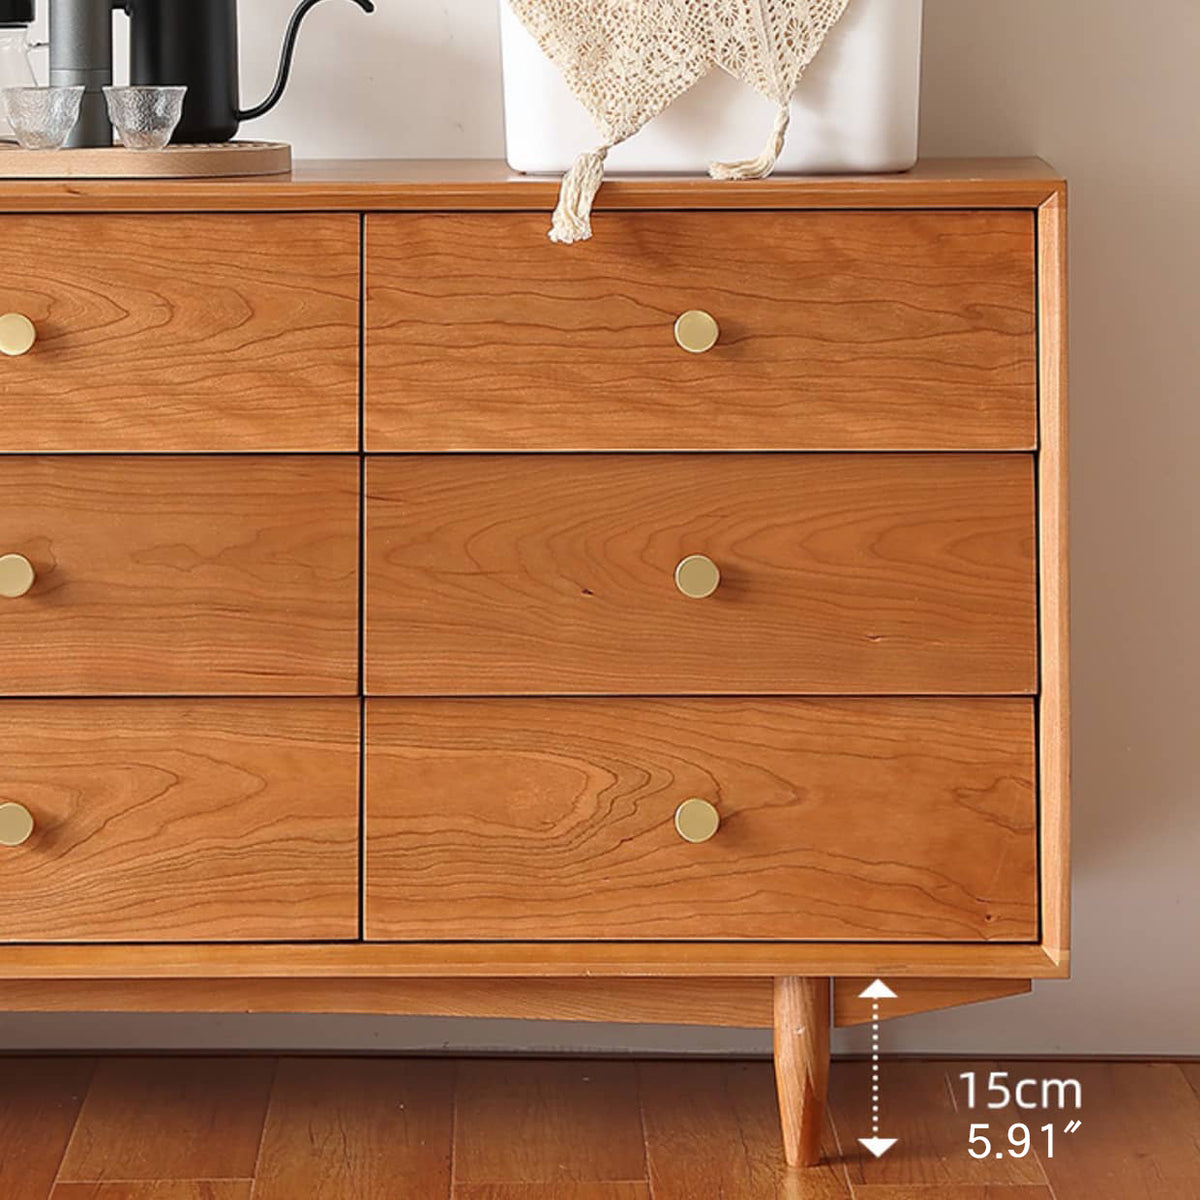 Premium Handcrafted Natural Cherry and Beech Wood Cabinet - Elegant and Durable Storage Solution Hersa-1636